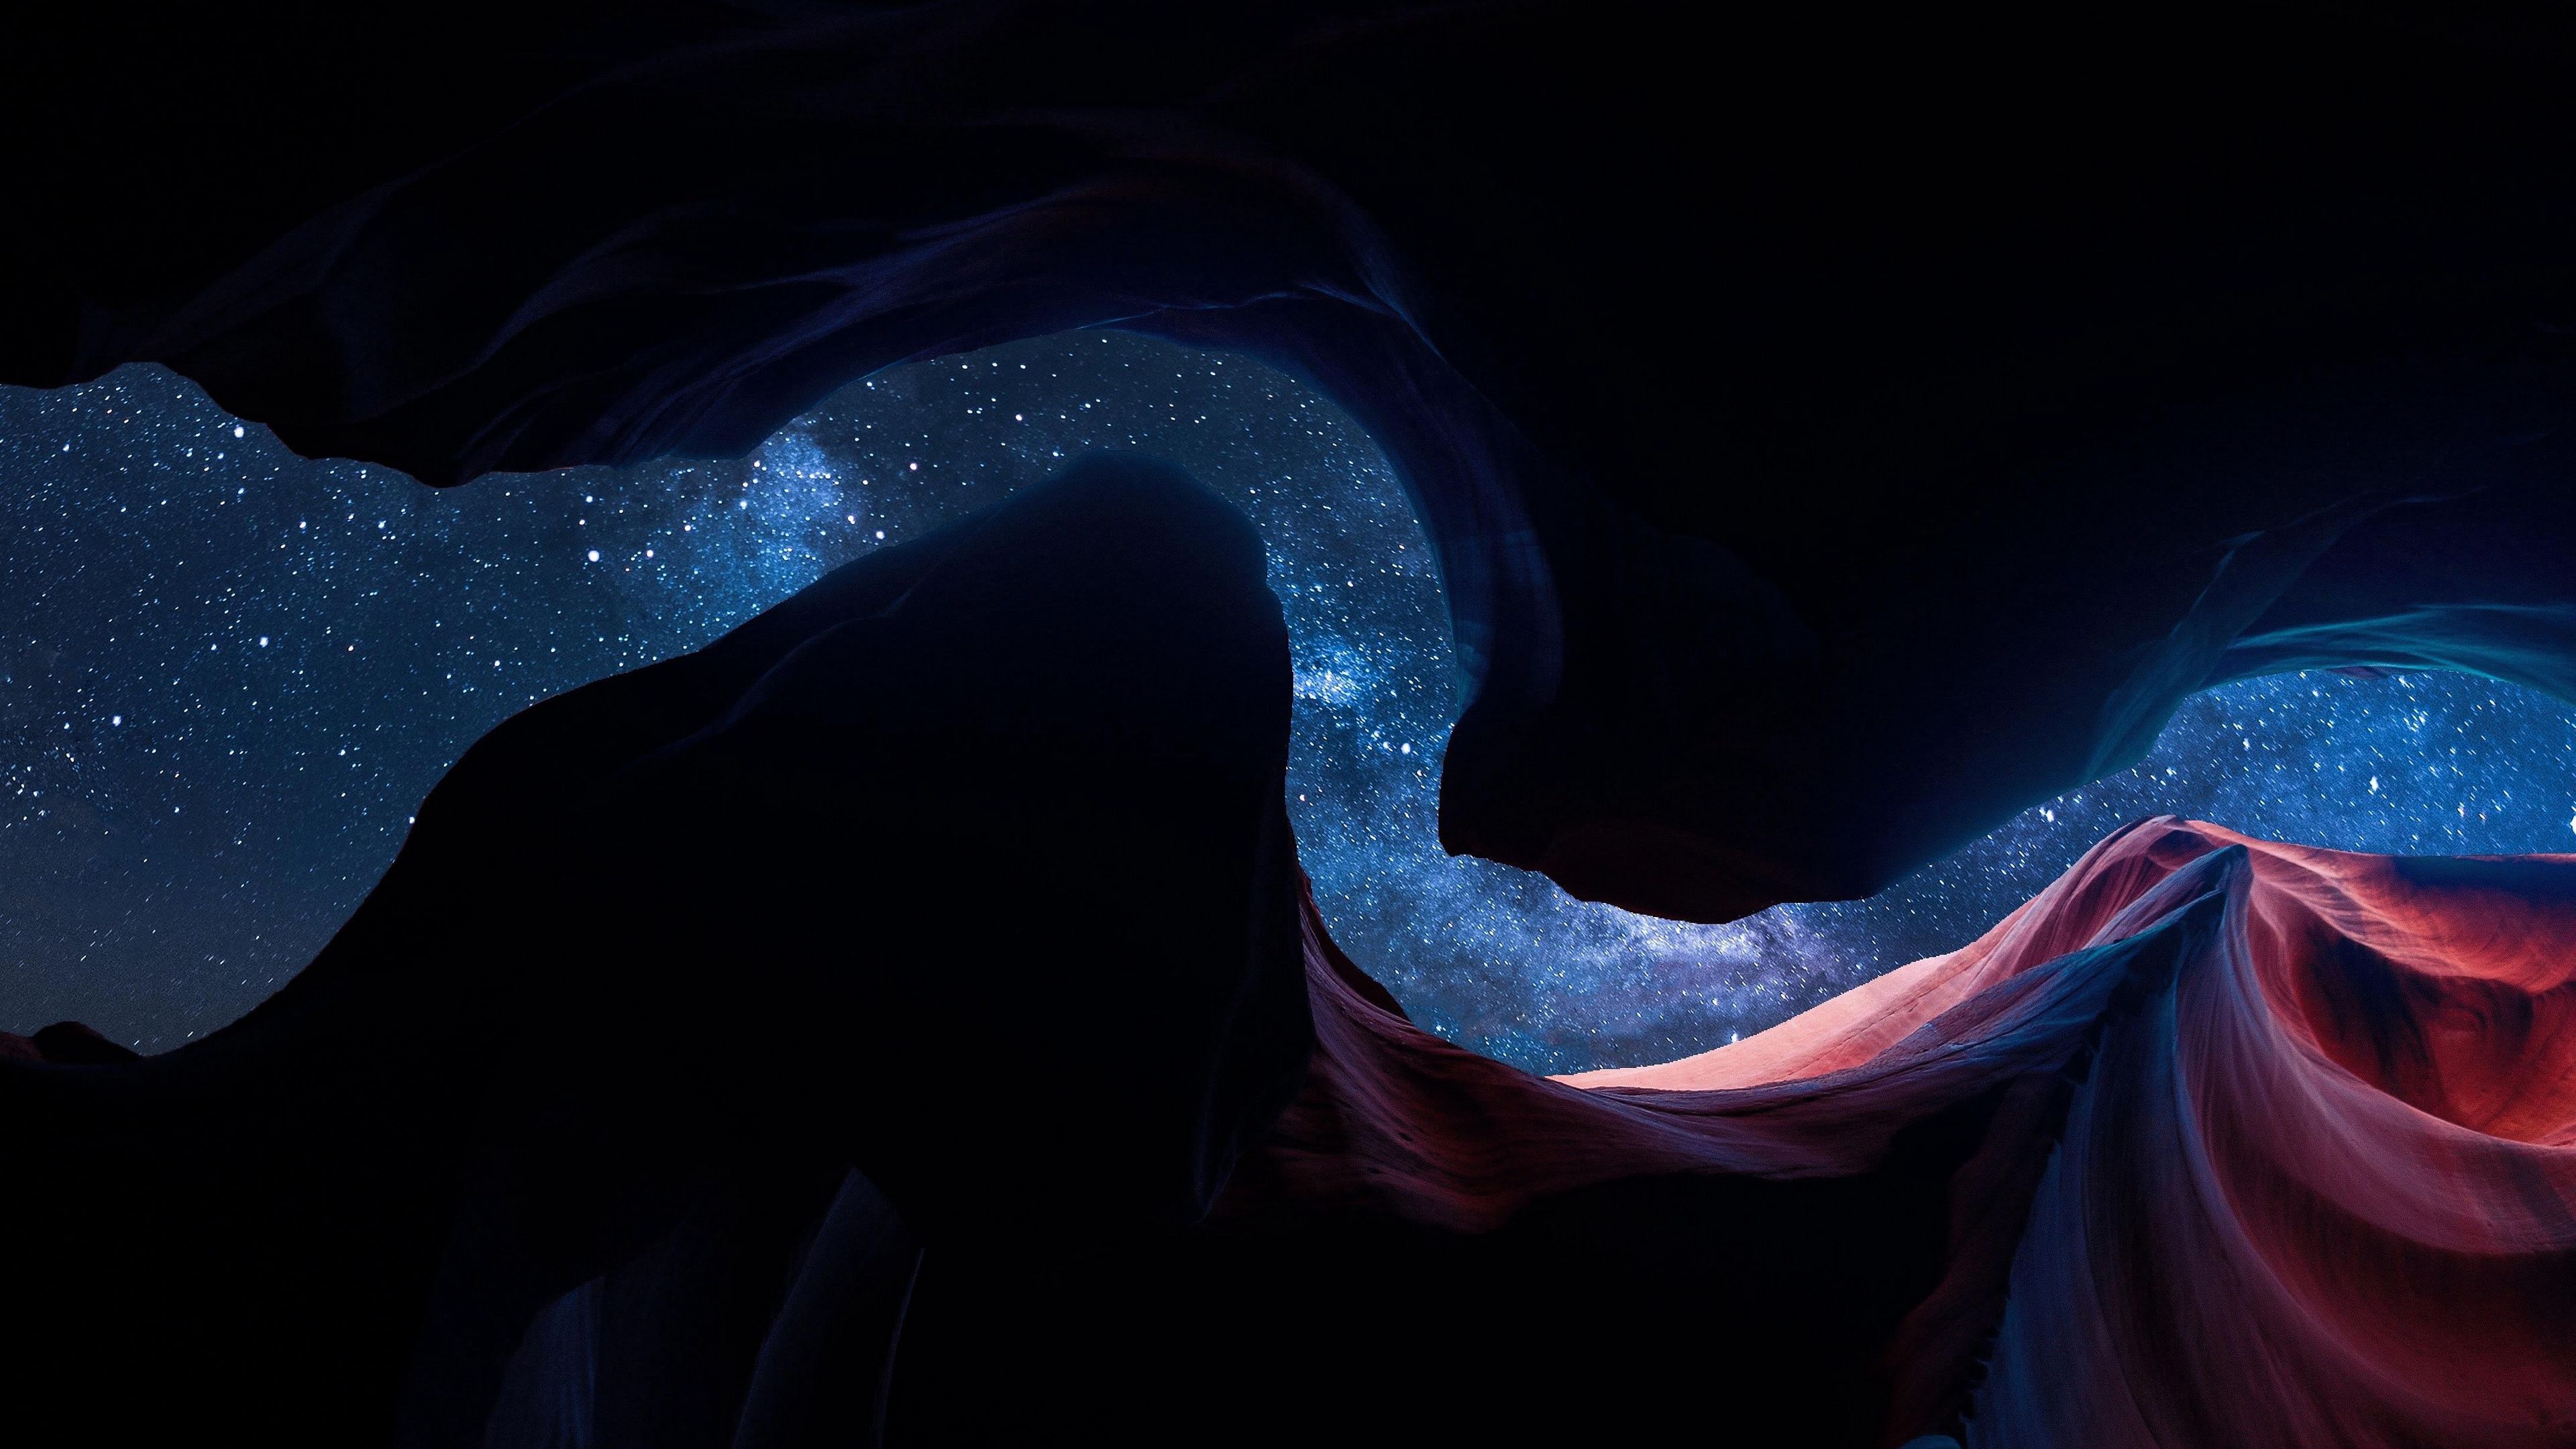 Canyon Starry Night Curved Stars 3840x2160